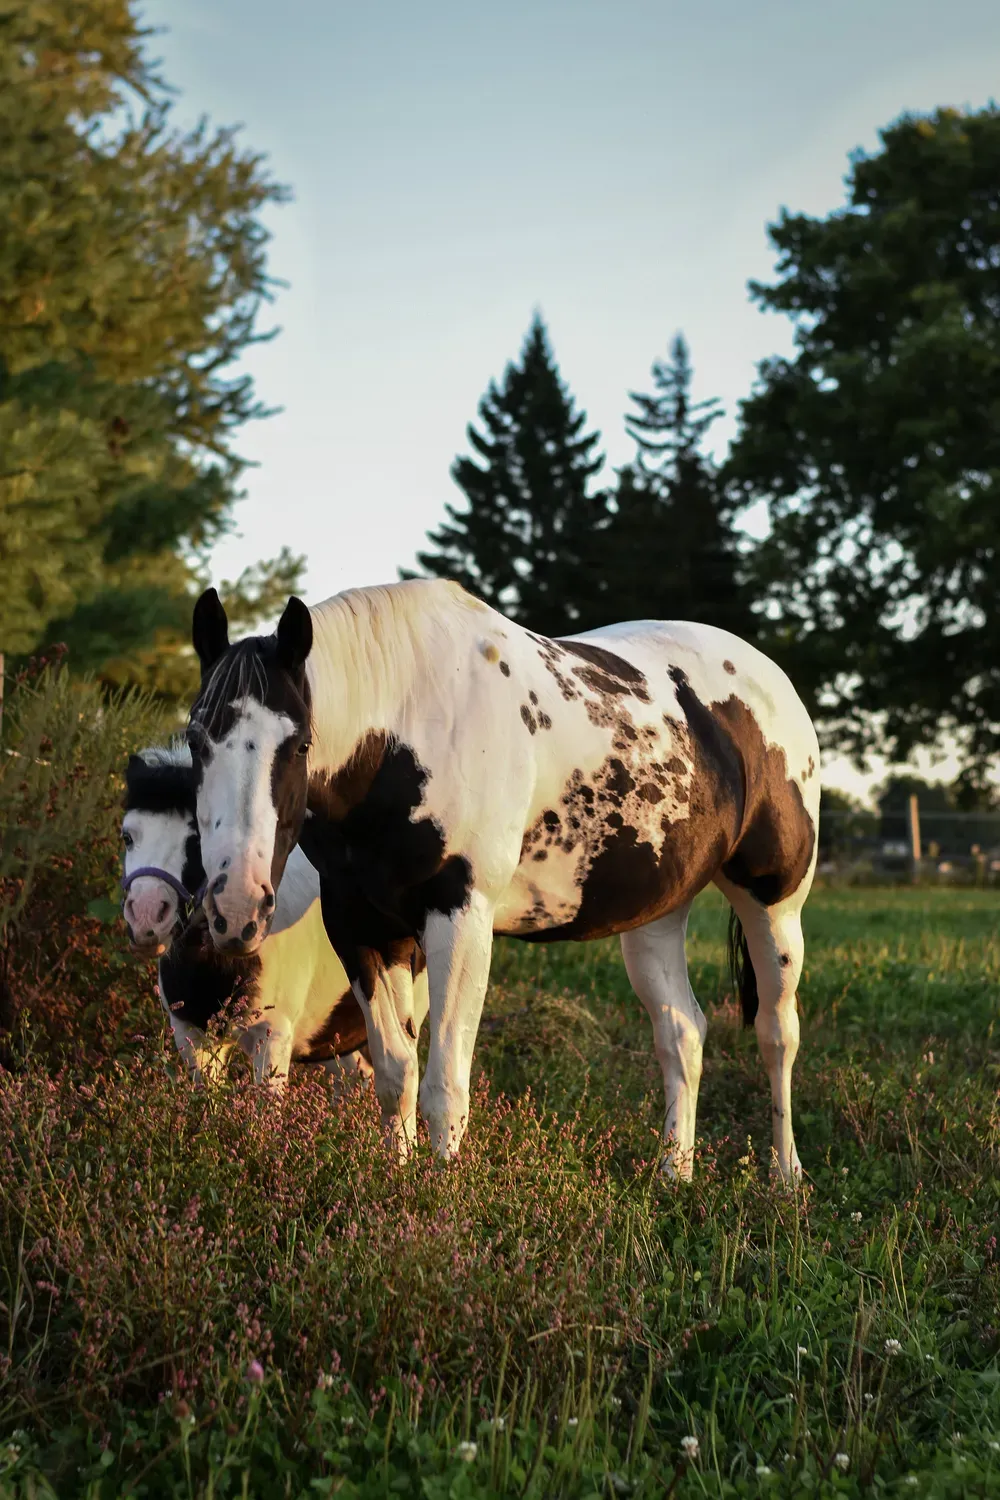 An American Paint Horse and a Foal